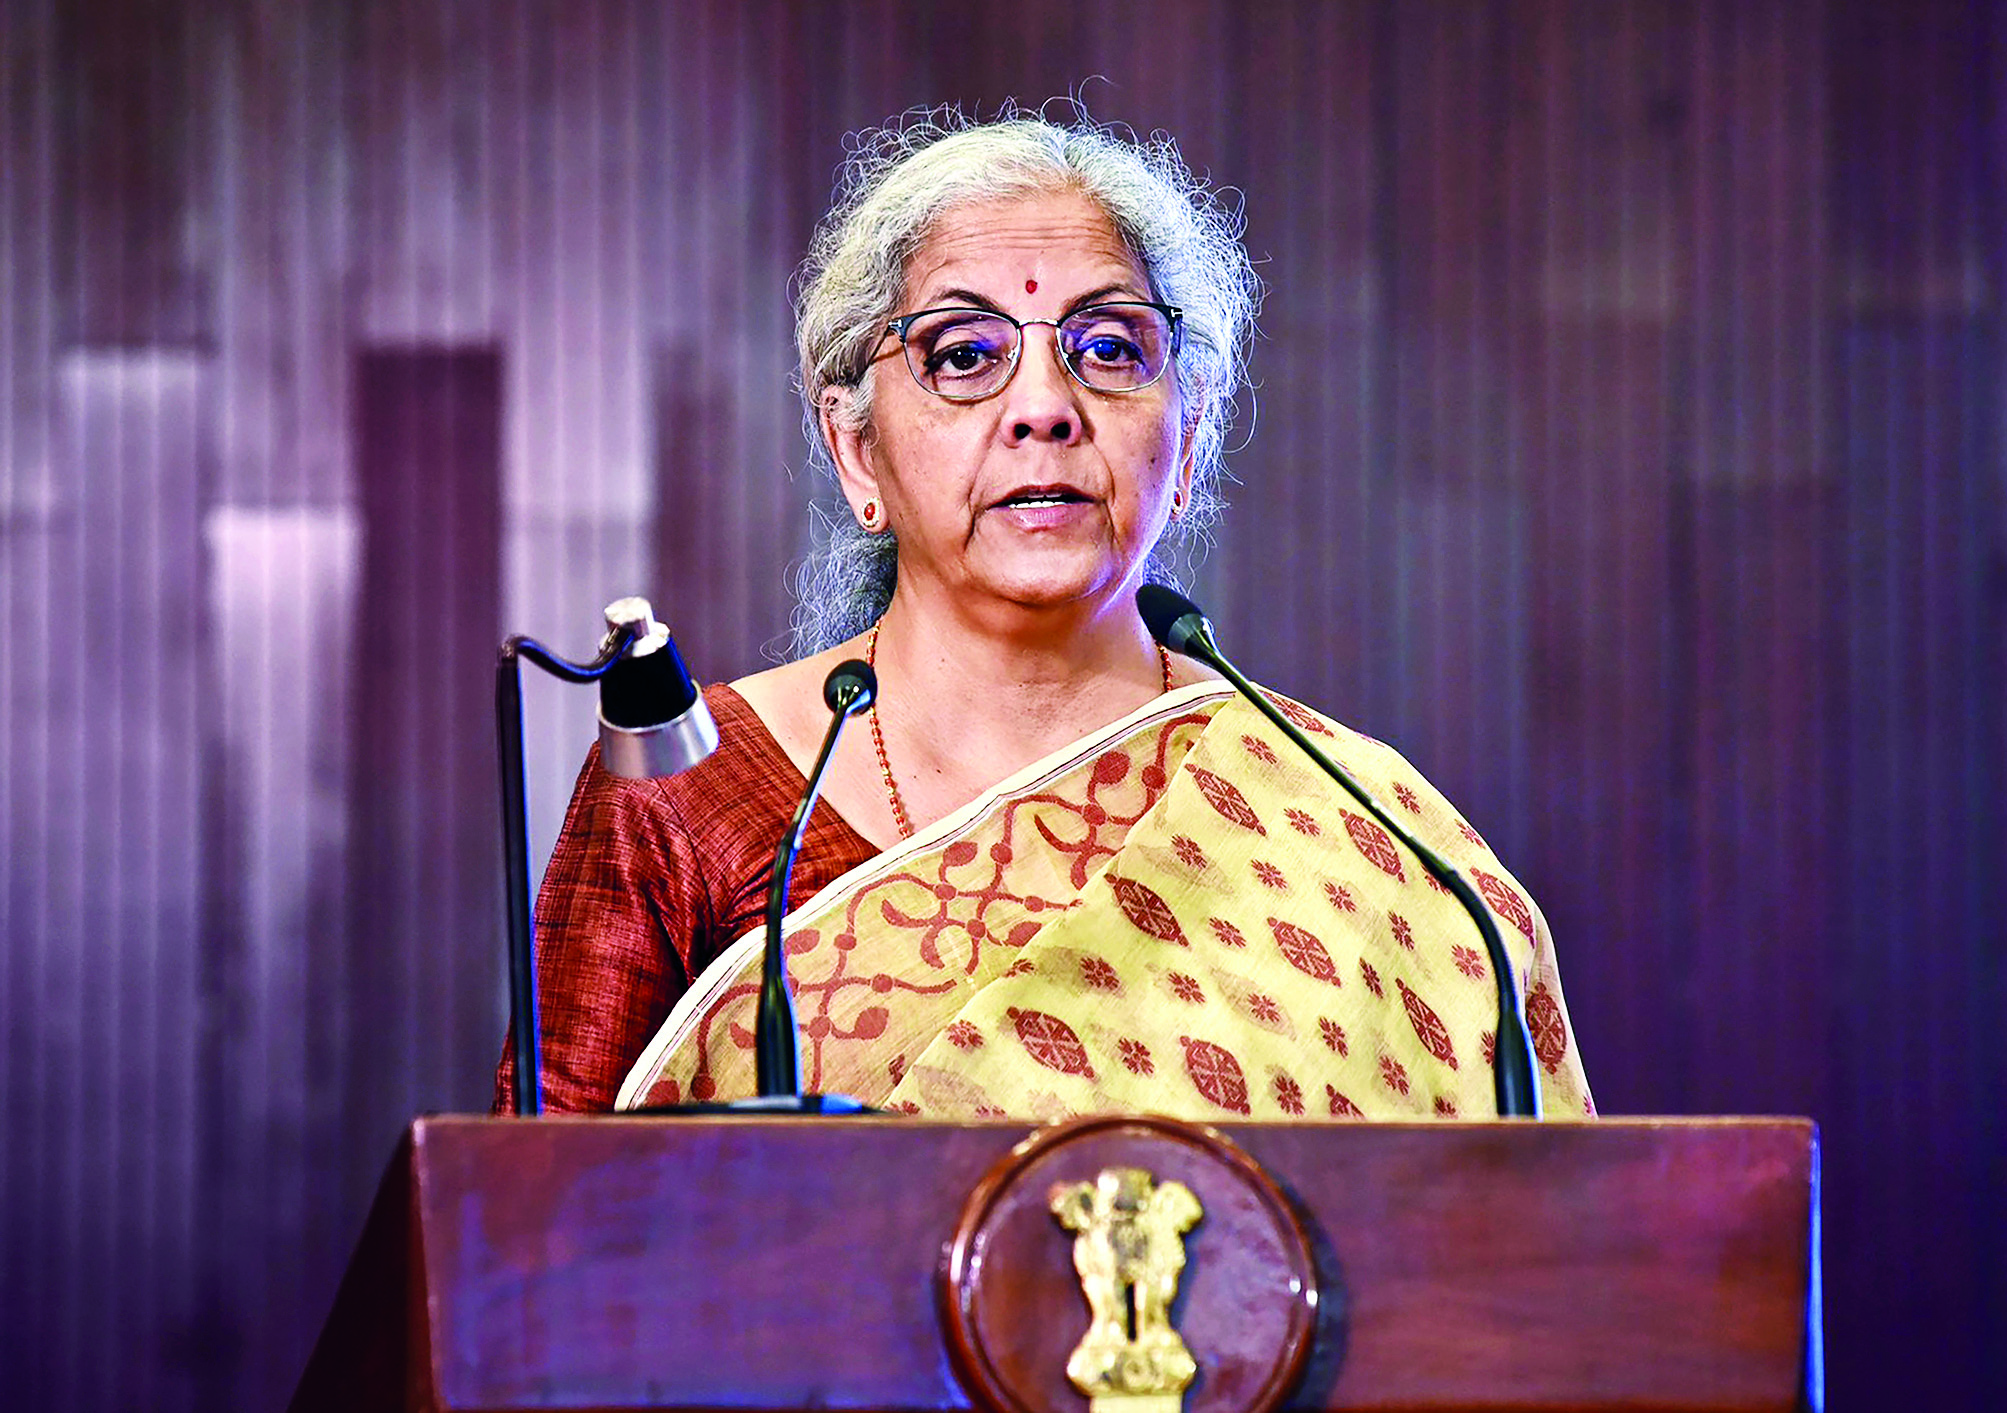 India needs stable government to achieve goal of Viksit Bharat by 2047: Sitharaman